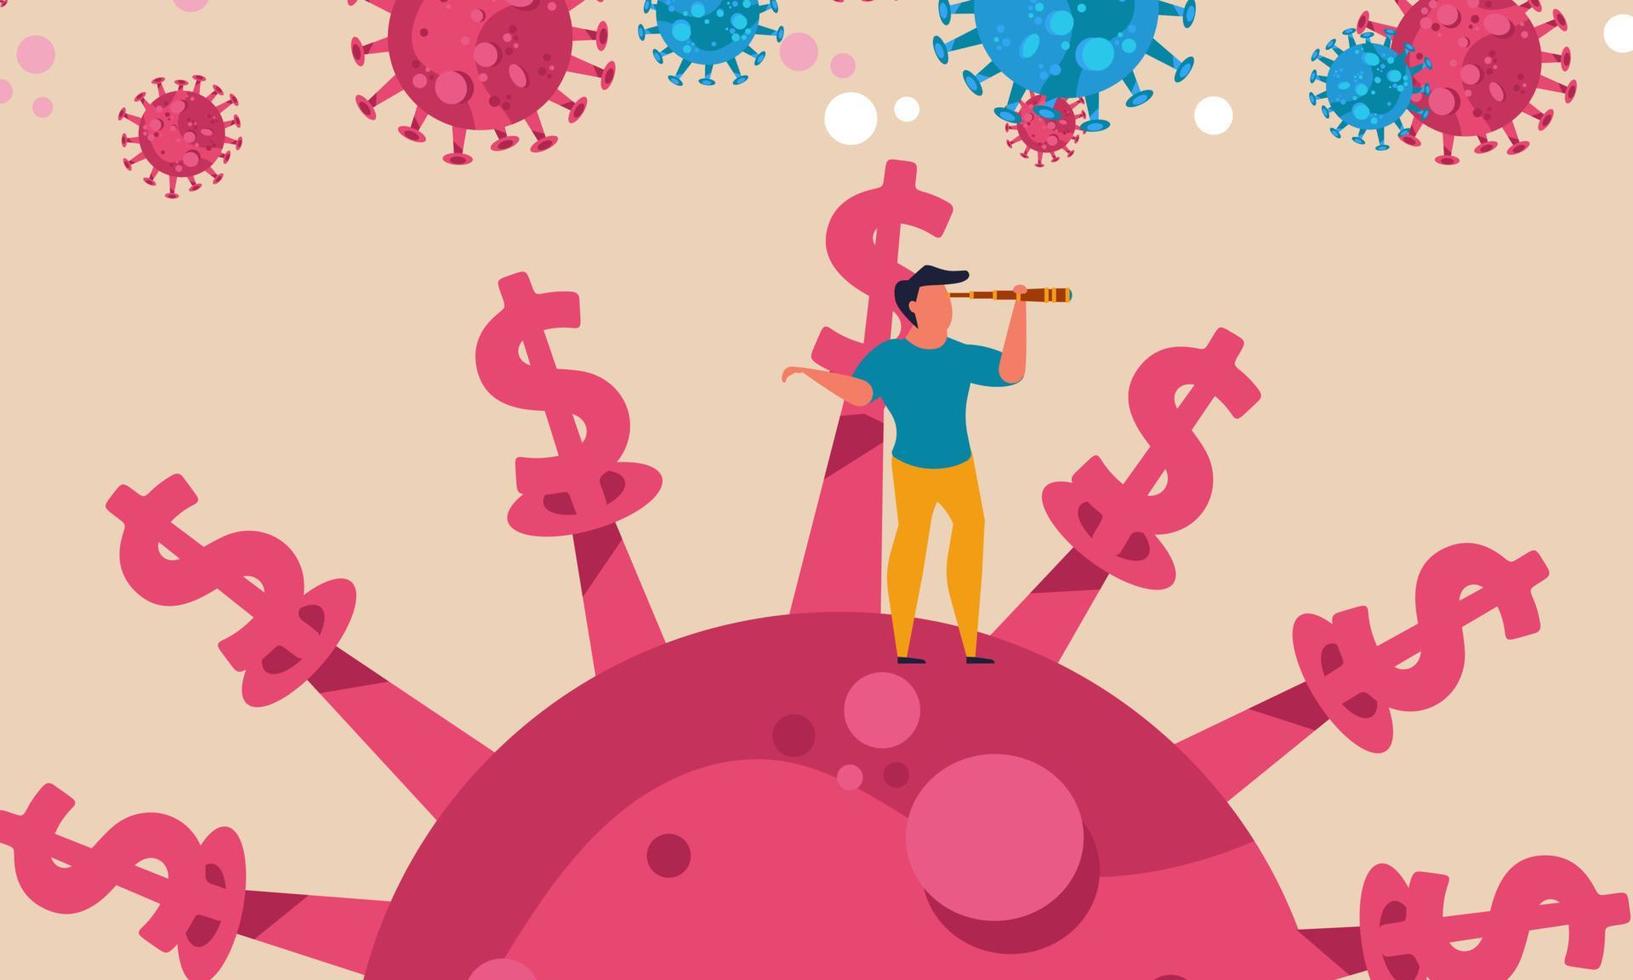 Stimulation of money for a company of entrepreneurs. A man stands on the virus and looks to the future vector illustration. Helping people business from the reserve during the pandemic crisis.